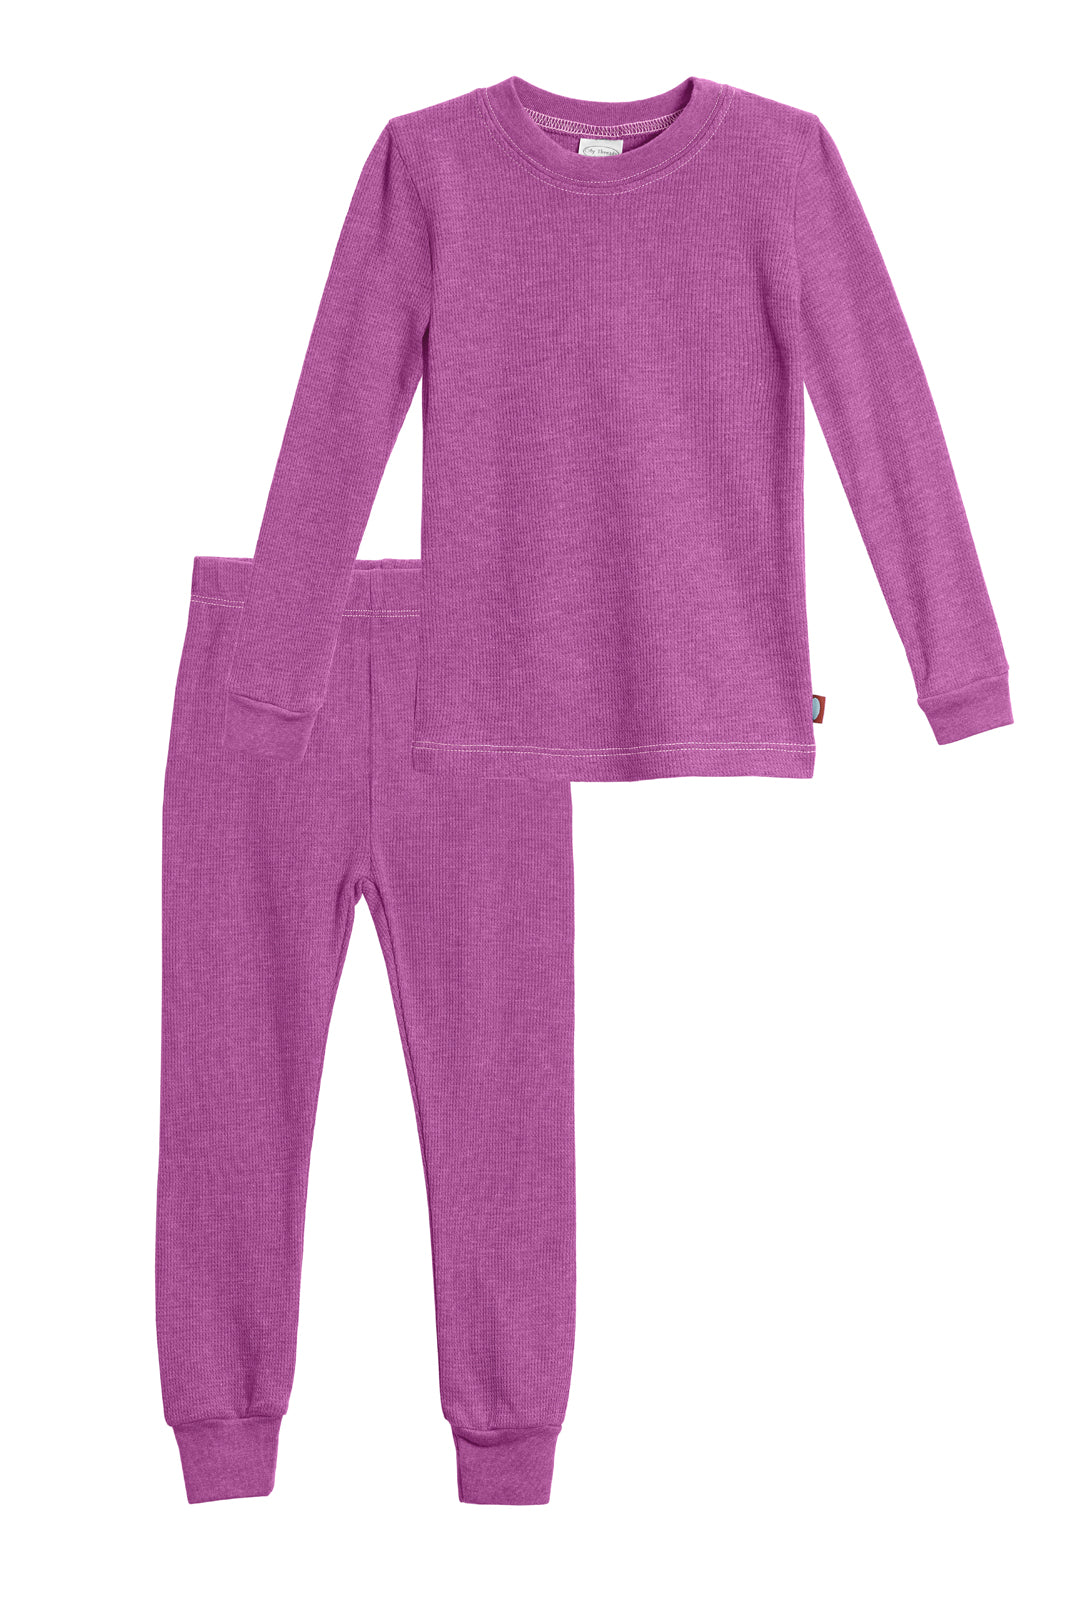 Girls Soft & Cozy Thermal 2-Piece Long Johns